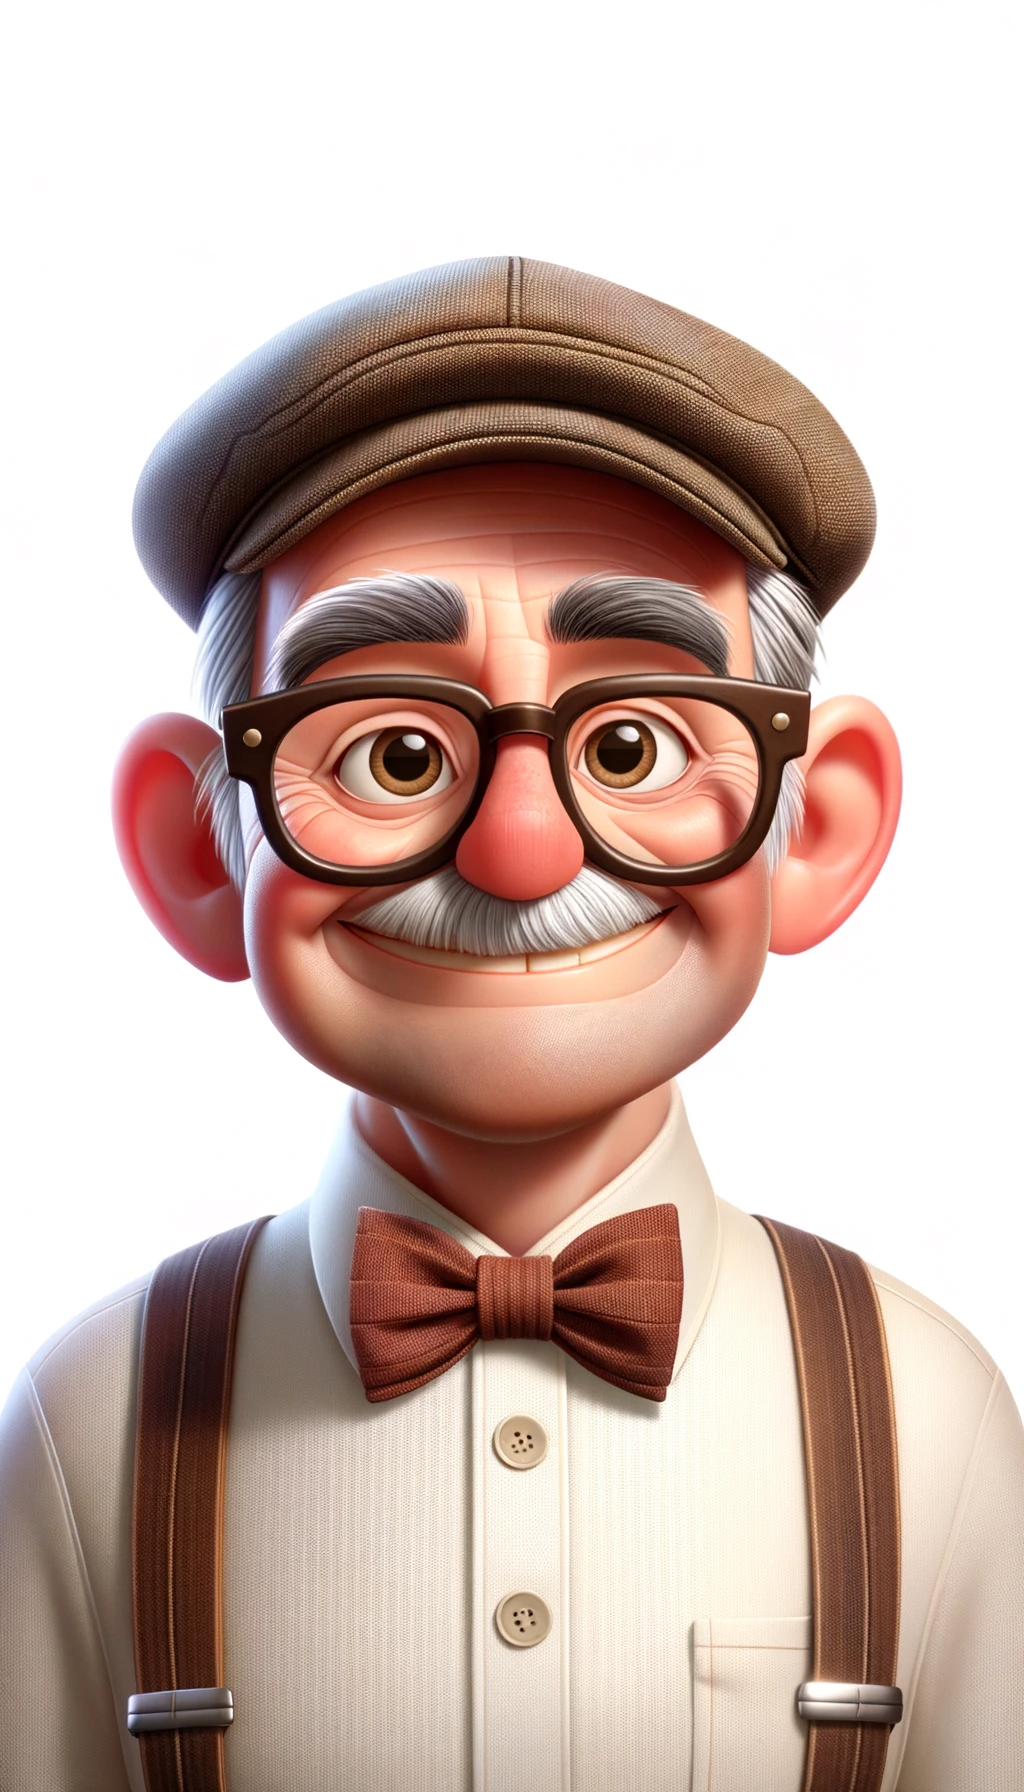 AI art of an older gentleman, wearing a hat and glasses, in a cartoon style